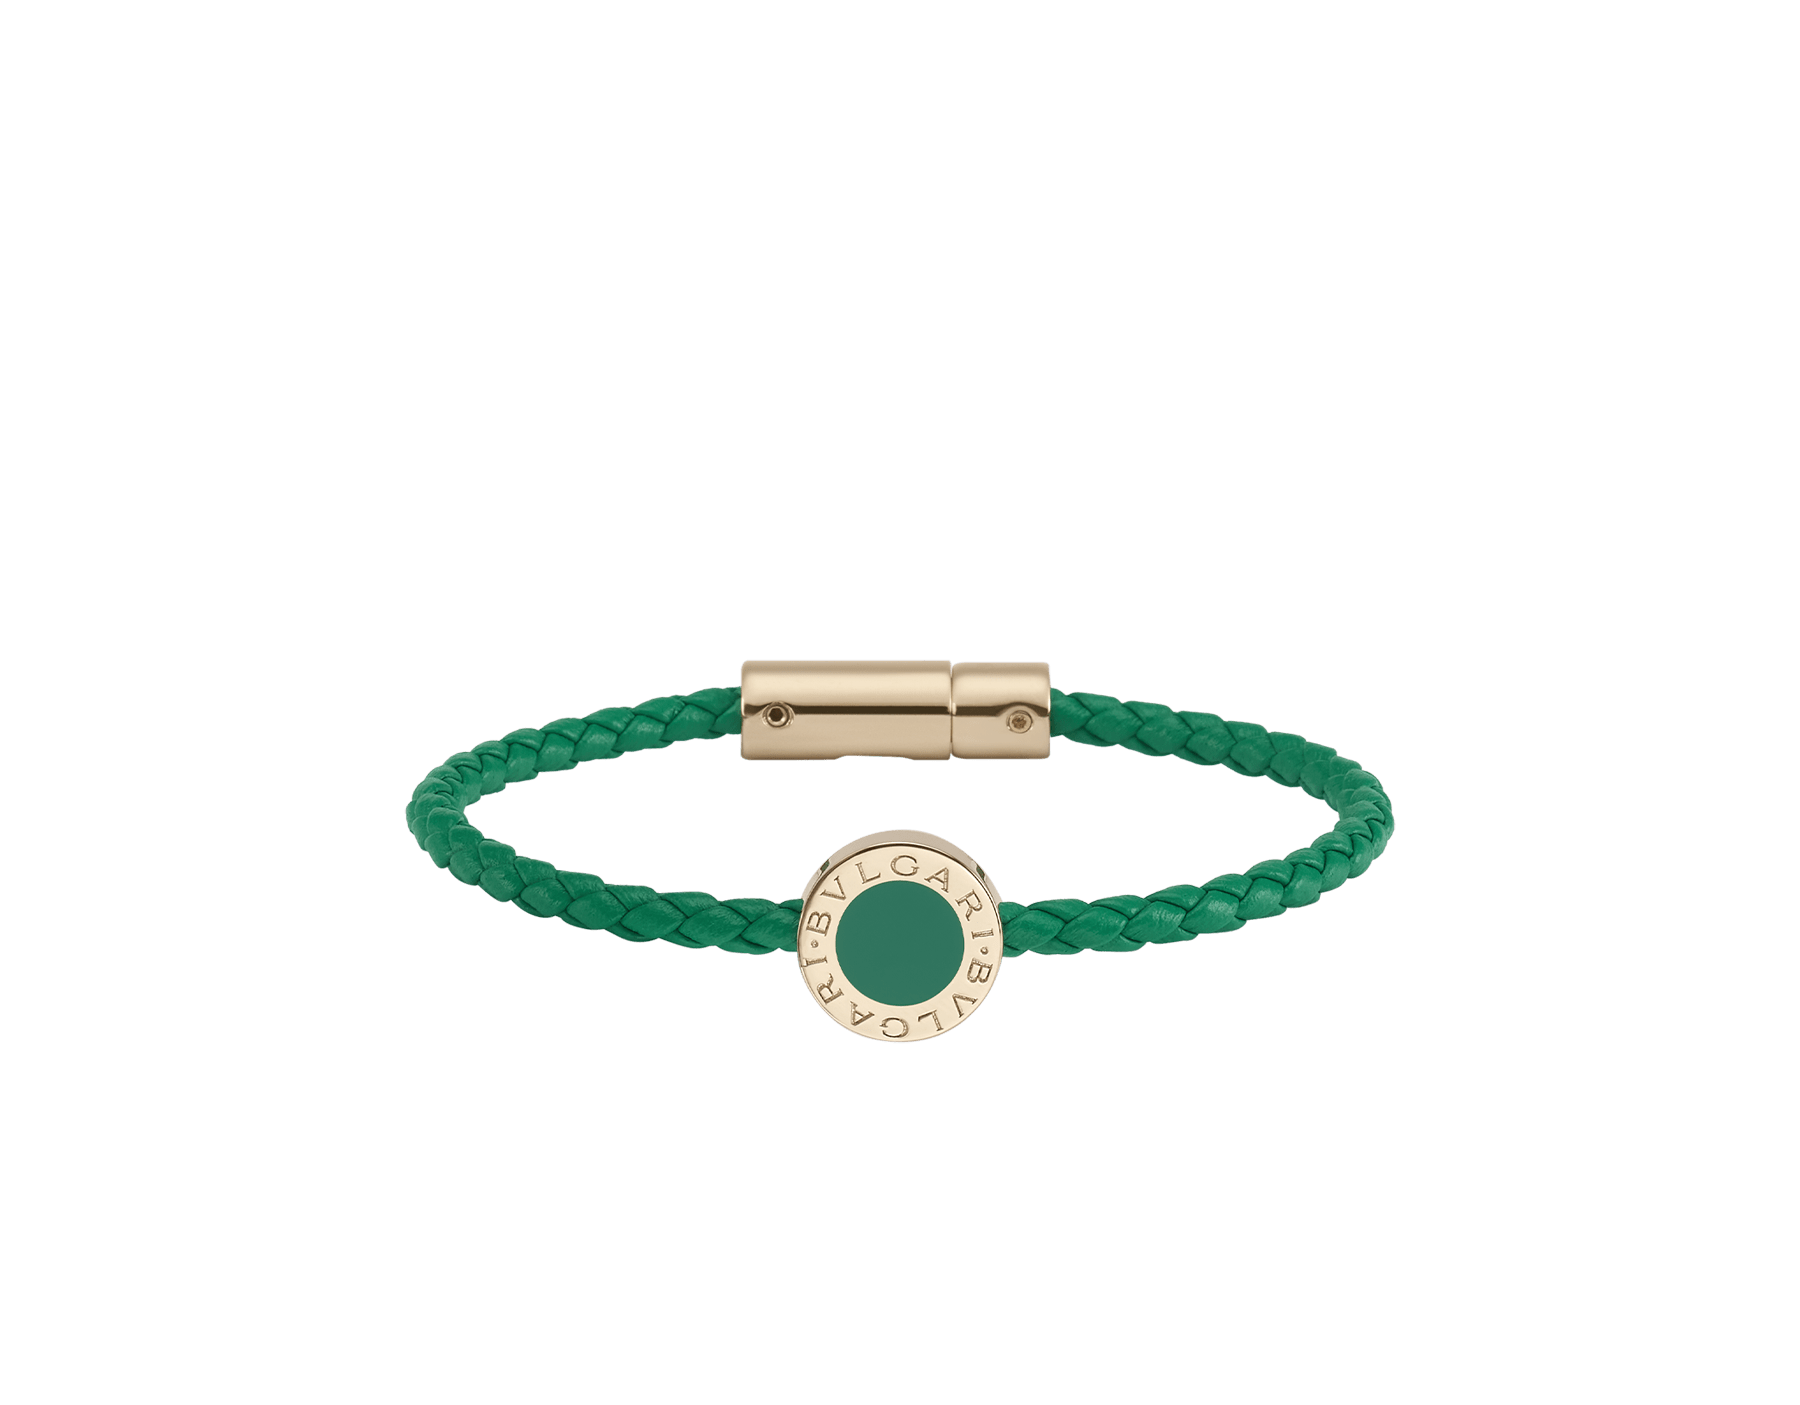 BULGARI BULGARI bracelet in spring peridot green braided calf leather with light gold-plated brass clasp. Iconic embellishment in light gold-plated brass finished with spring peridot green enamel. BB-LOGO-WCL-SG image 1